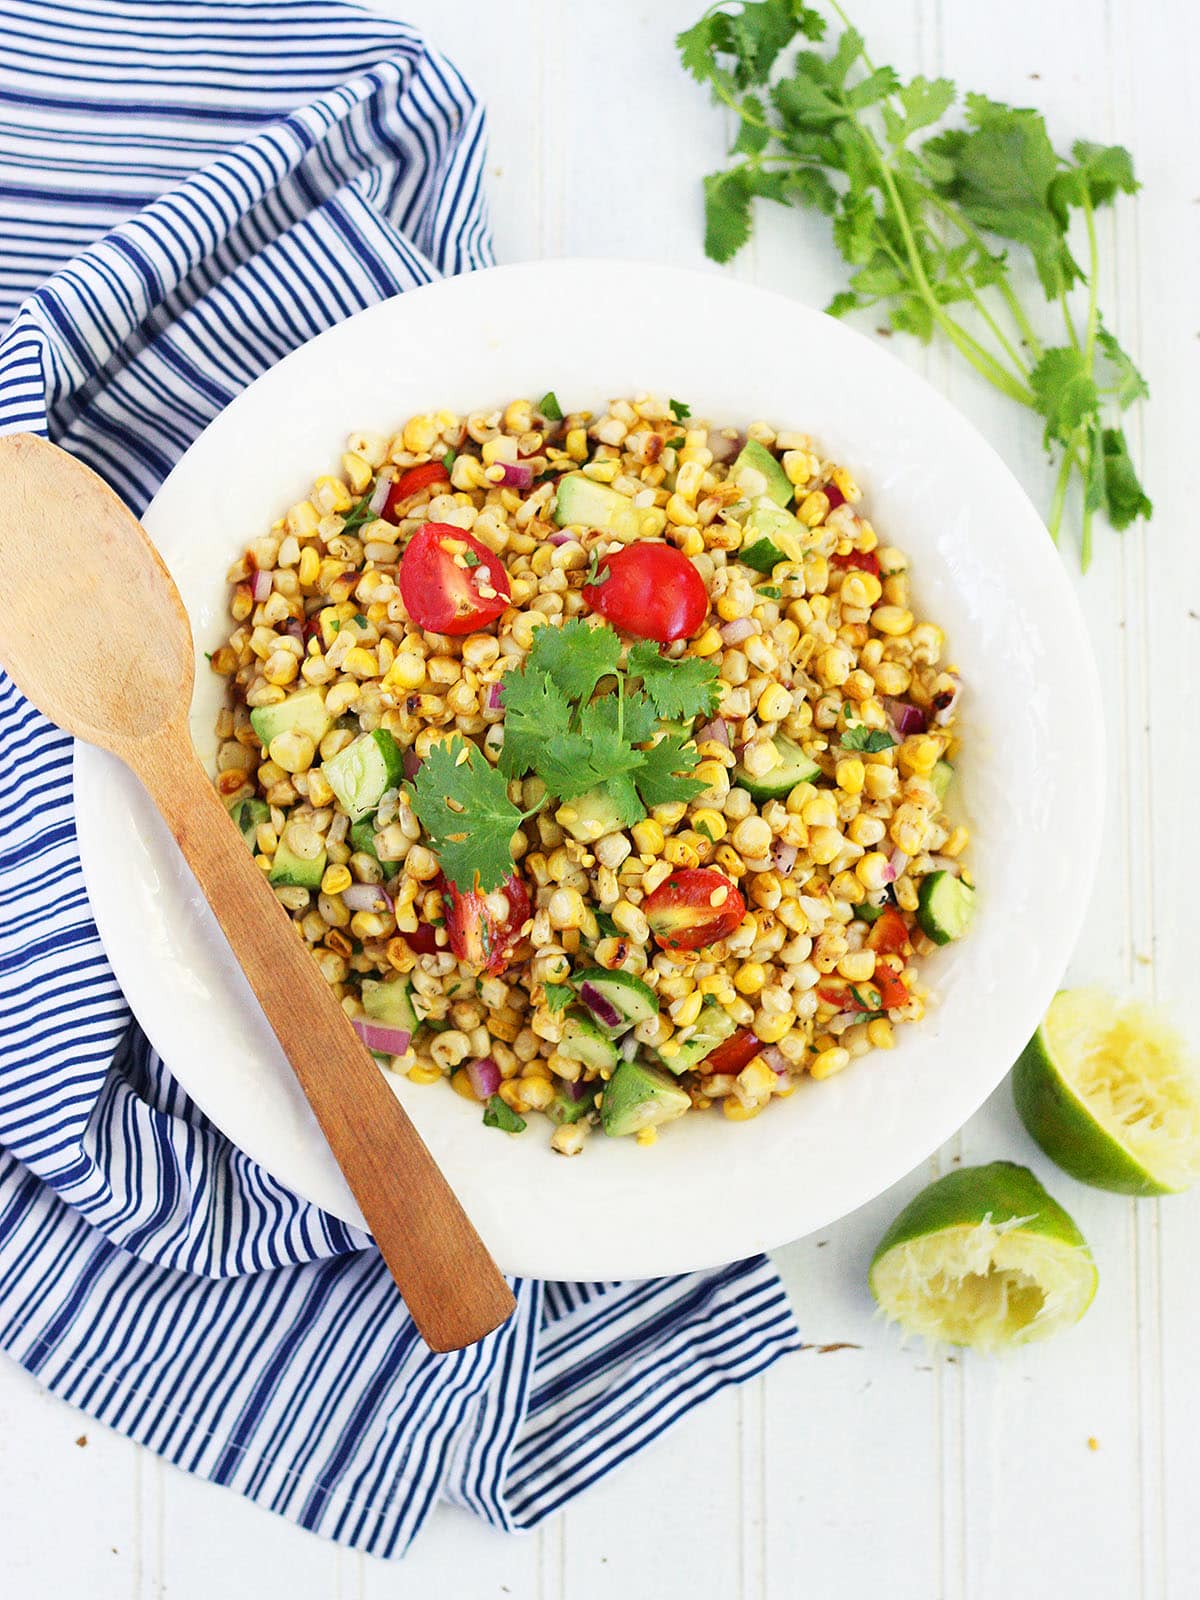 roasted corn salad in a white serving bowl garnished with a sprig of cilantro